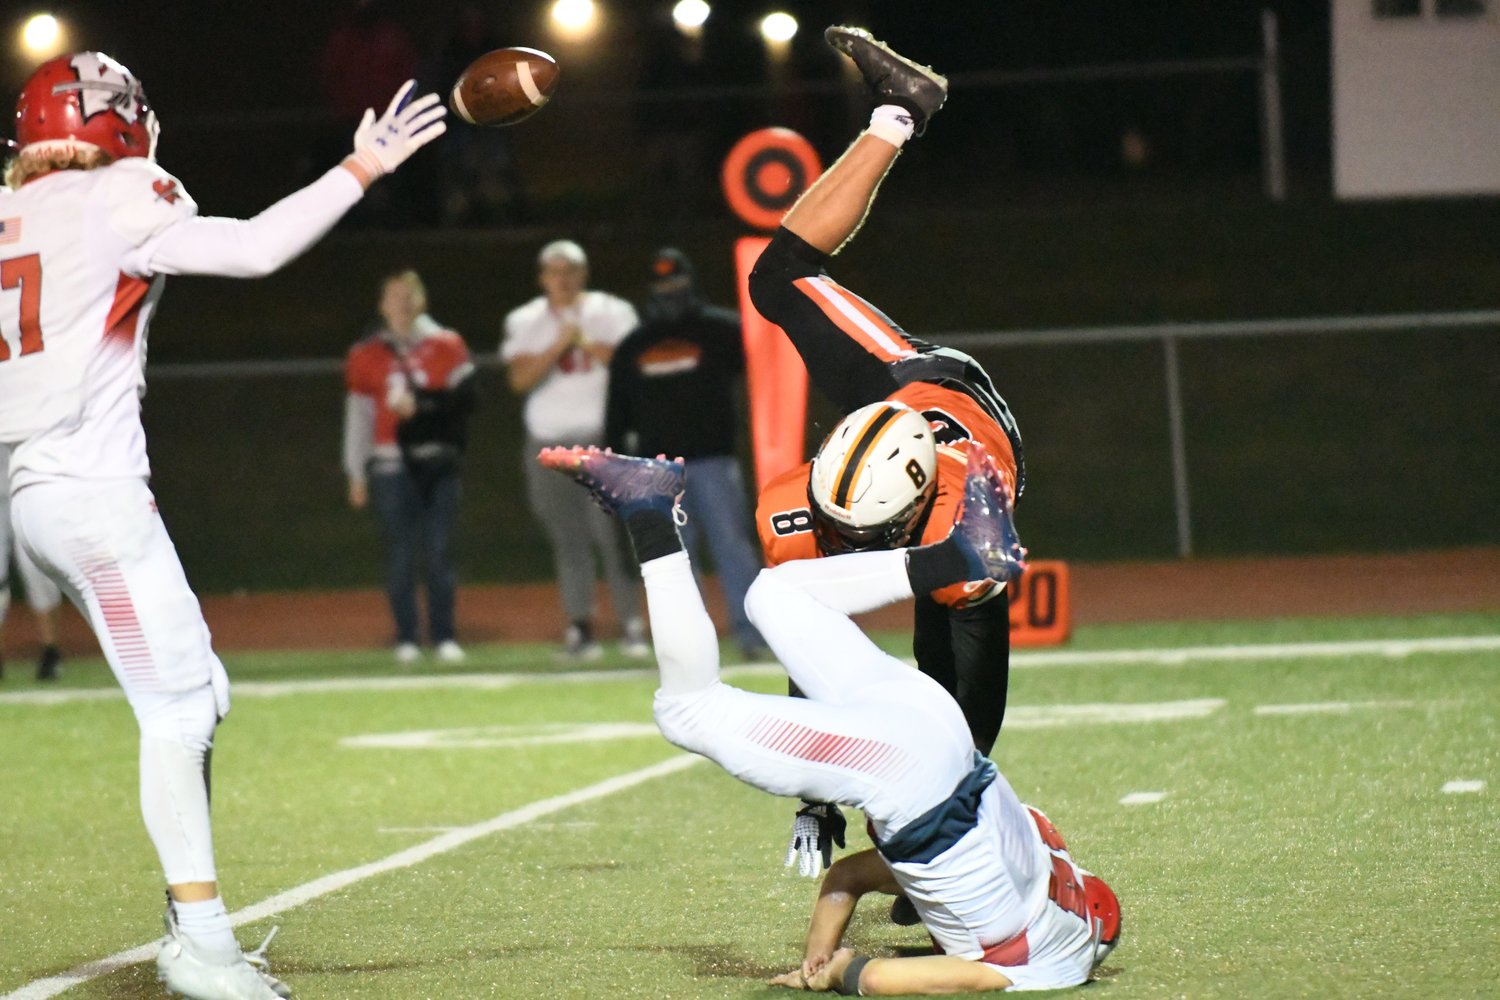 Action from Friday's district football clash between Kirksville and Warrenton